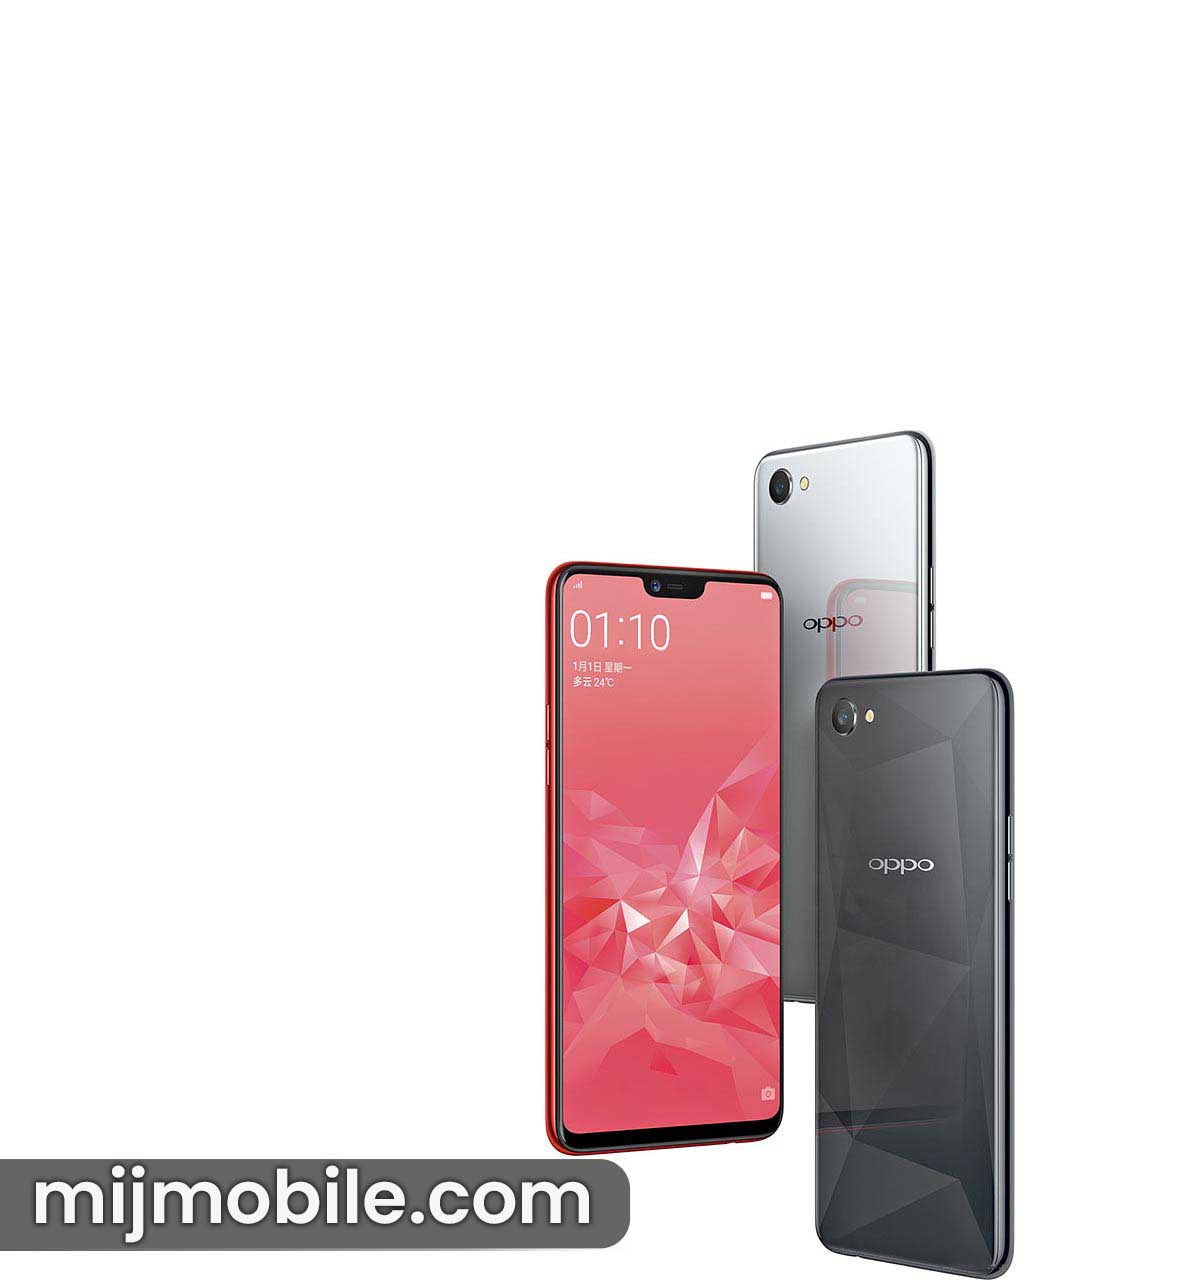 Oppo A3 Price in Pakistan & Specifications Oppo A3 Price in Pakistan is only 45,499.